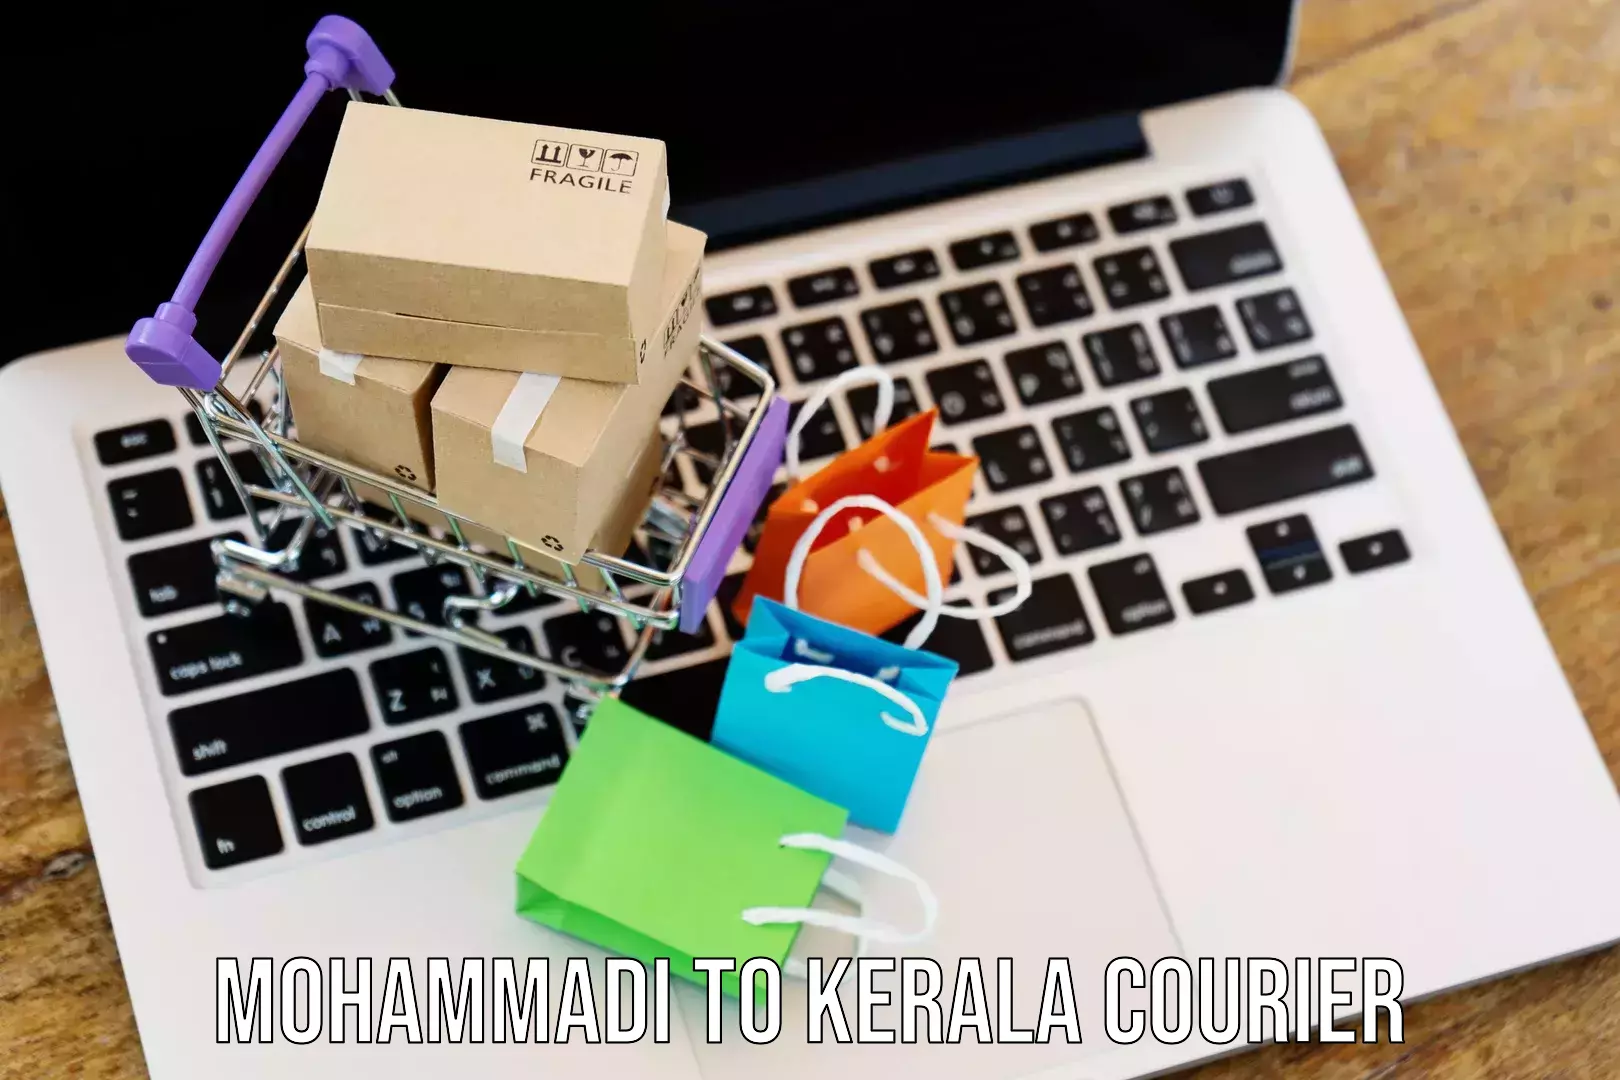 Express delivery solutions Mohammadi to Kerala